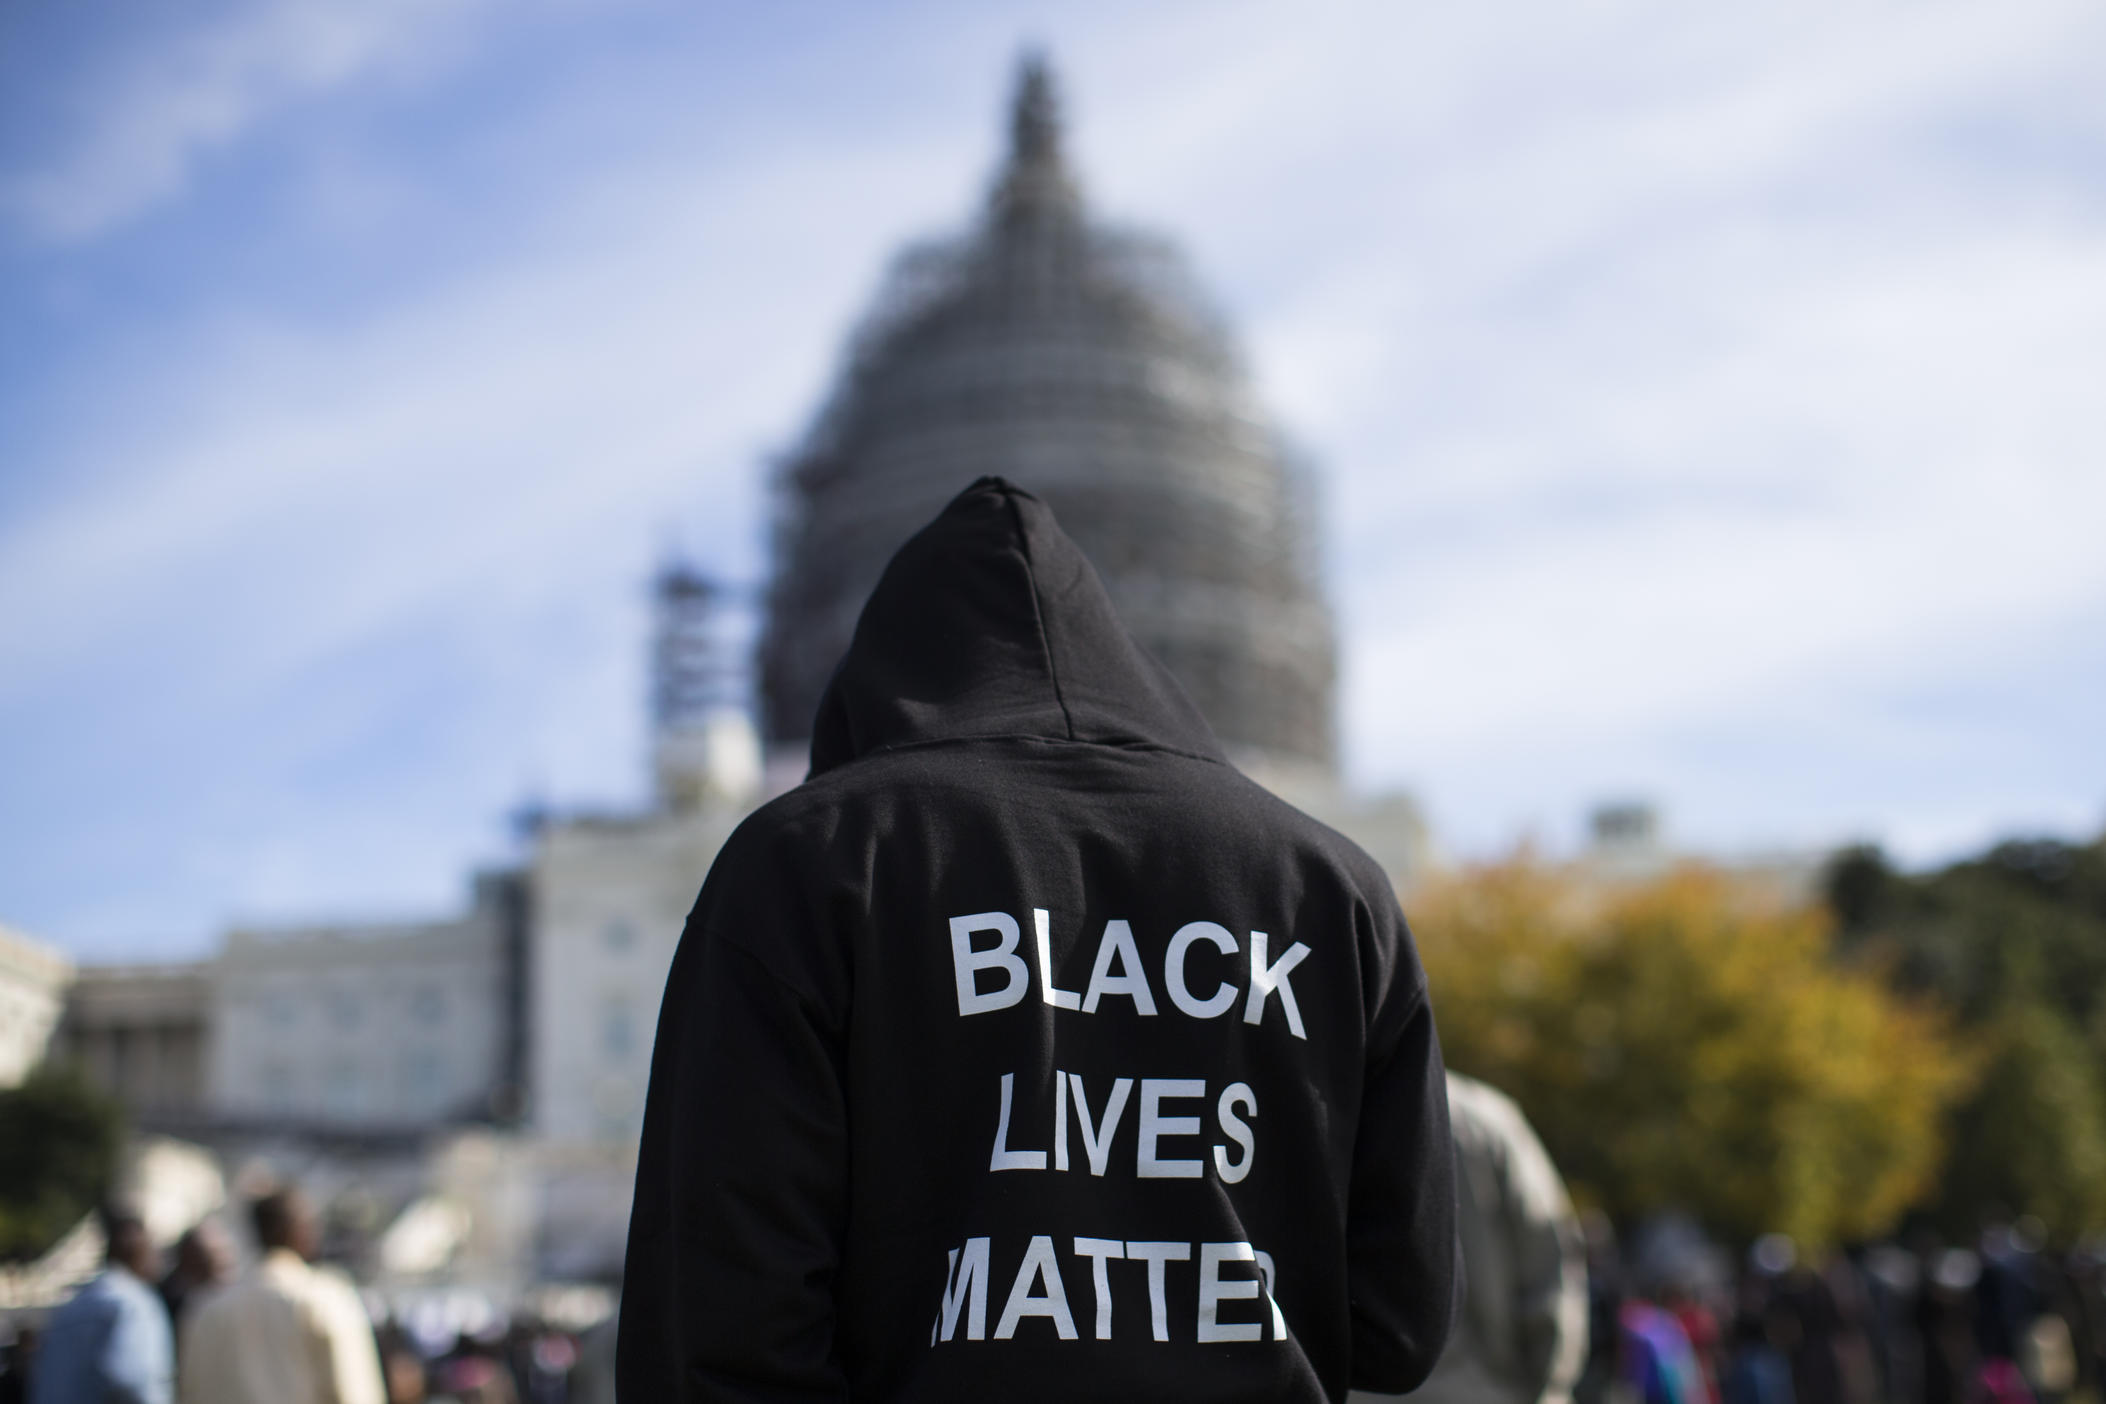 Neal Blair, of Augusta, Ga., wears a hoodie which reads, "Black Lives Matter" as stands on the lawn of the Capitol building during a rally to mark the 20th anniversary of the Million Man March, on Capitol Hill, on Saturday, Oct. 10, 2015, in Washington.